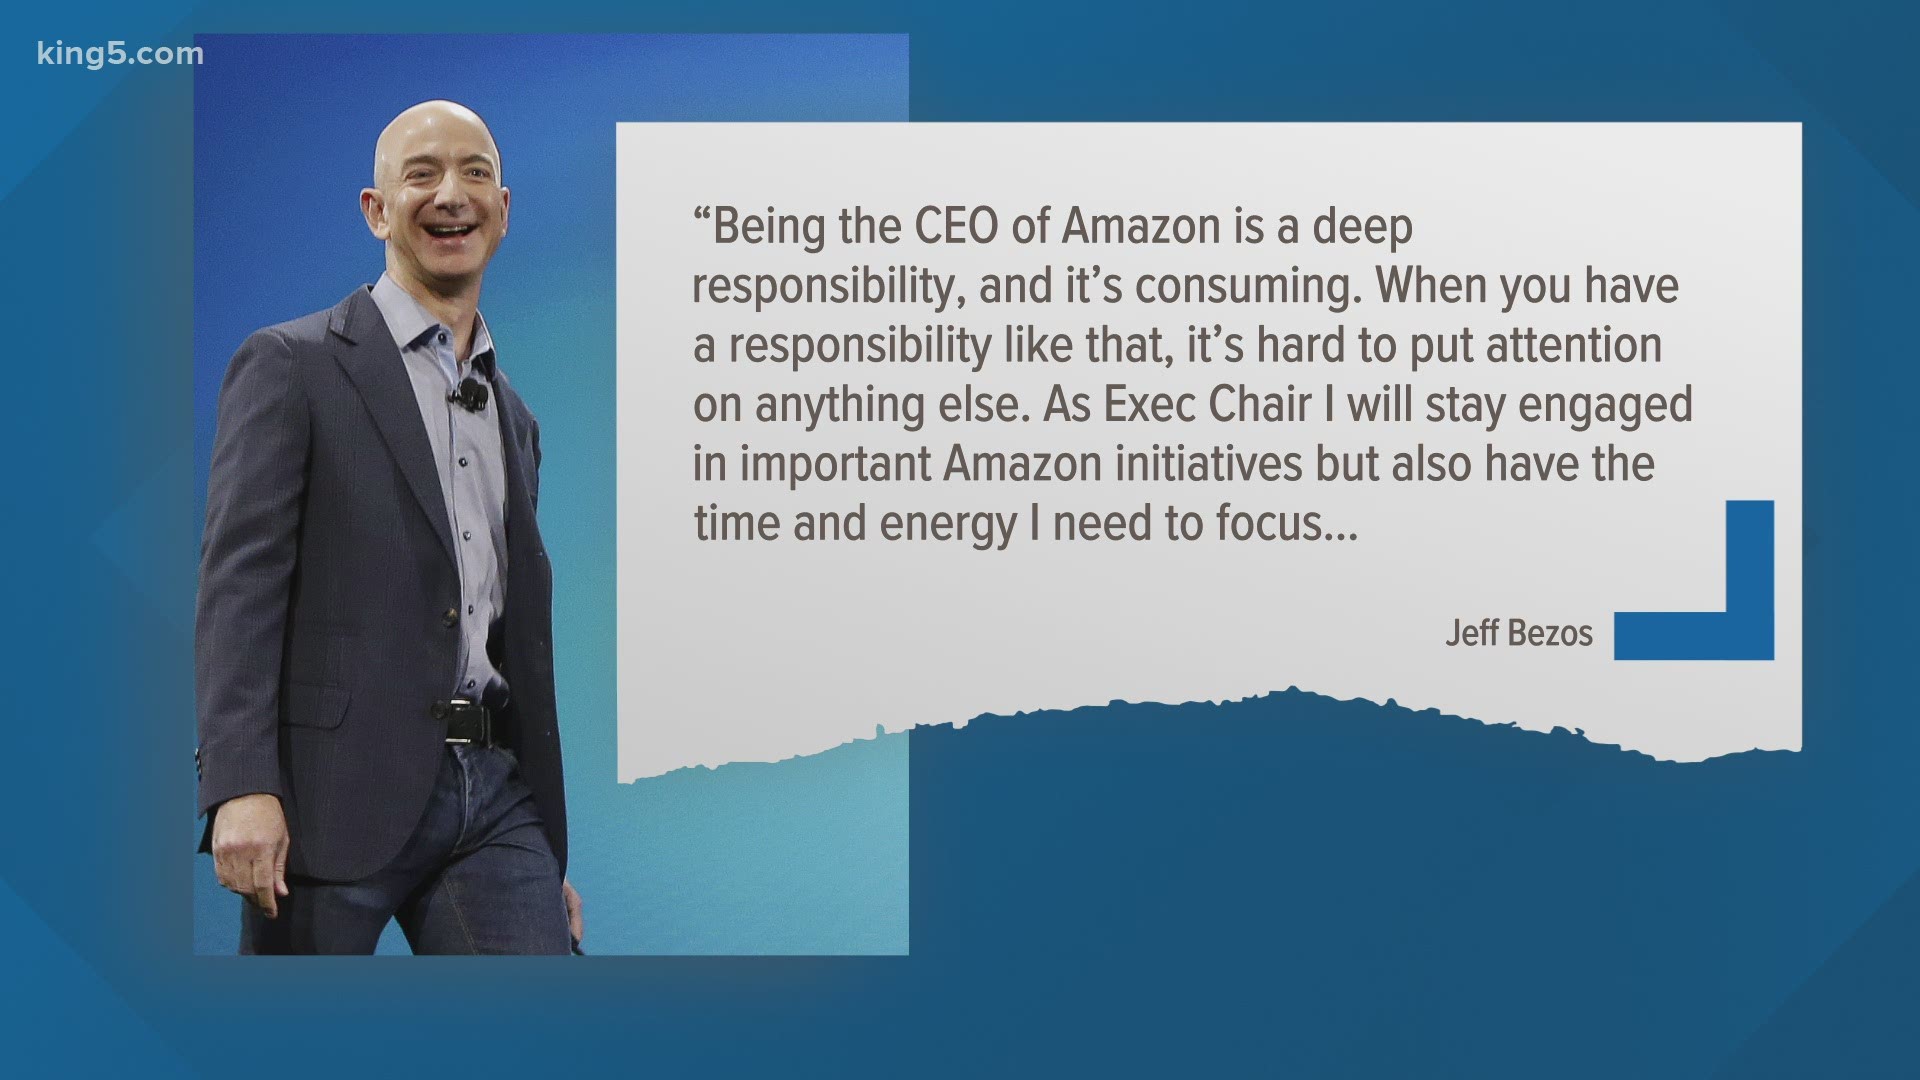 Amazon announced its founder and CEO Jeff Bezos will transition to the role of executive chair in the third quarter of 2021.